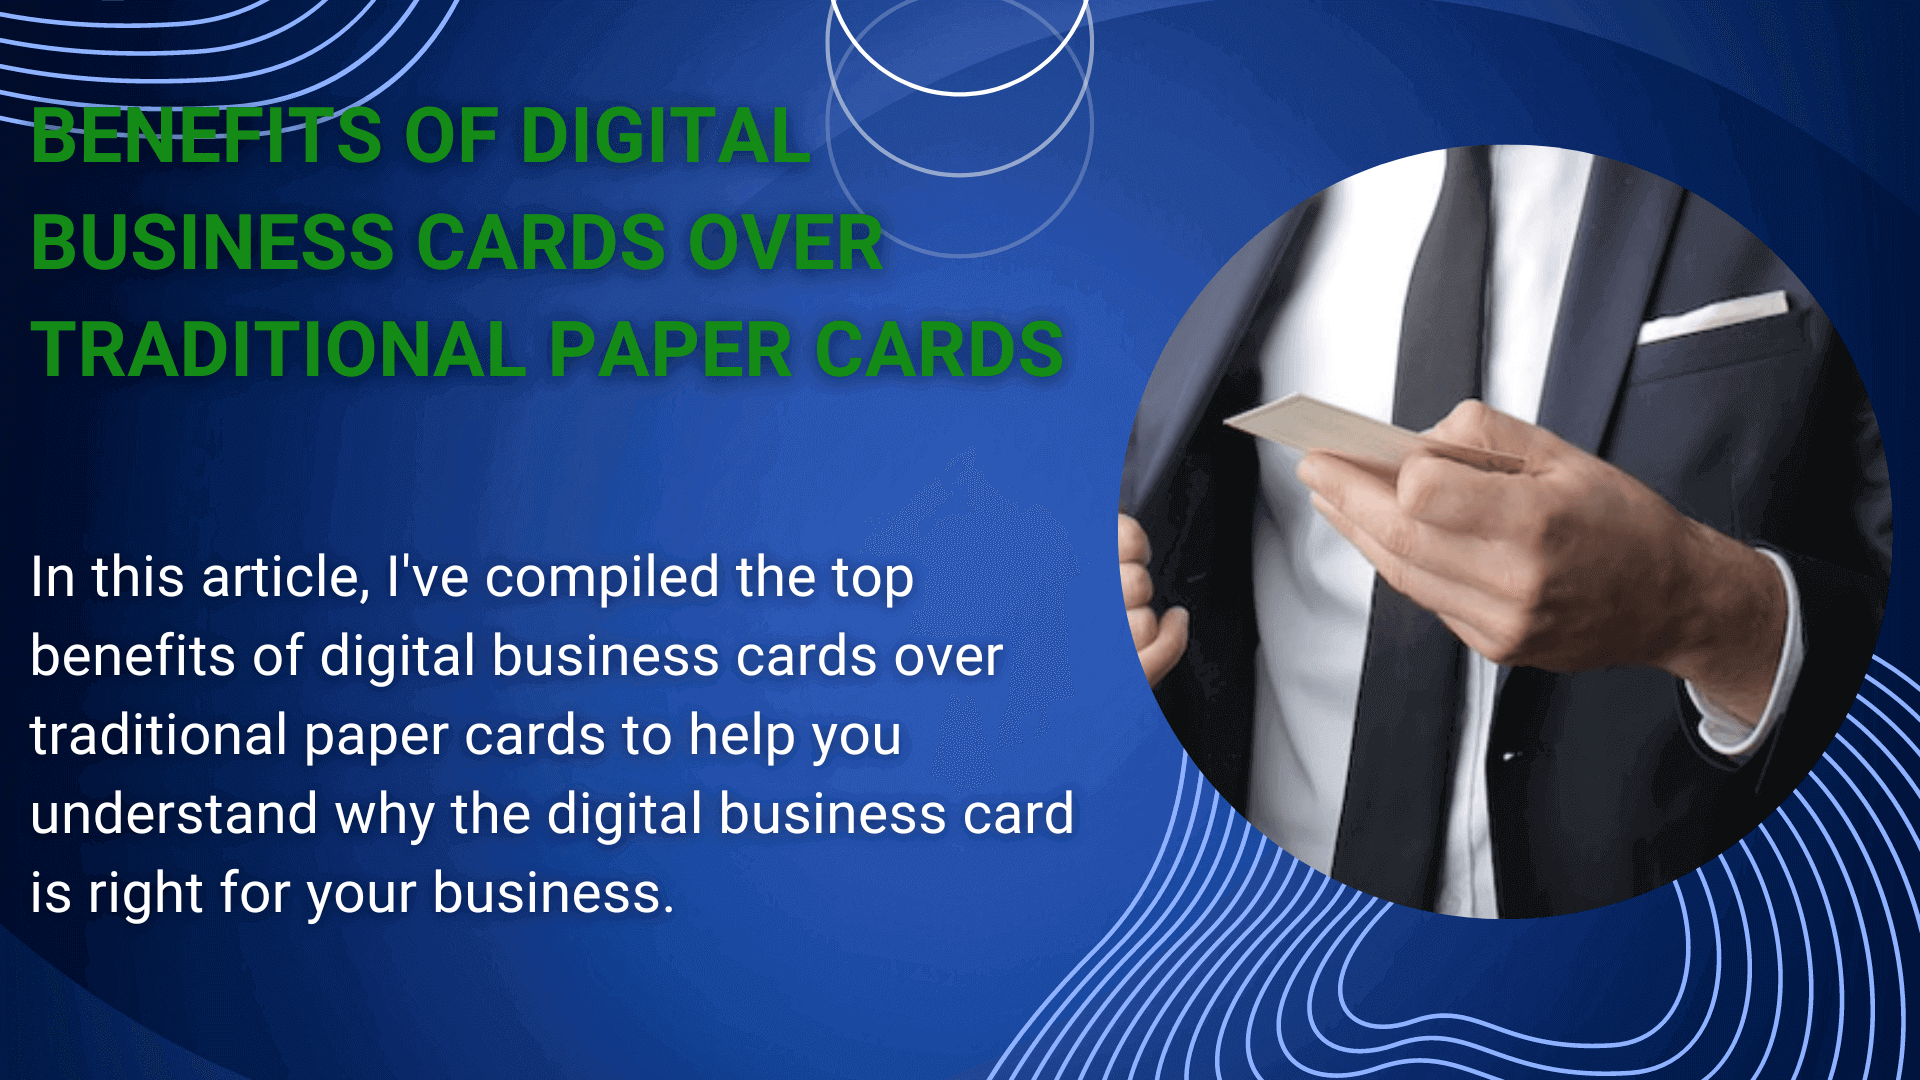 Featured Image. Benefits of Digital Business Cards over Traditional Paper Cards